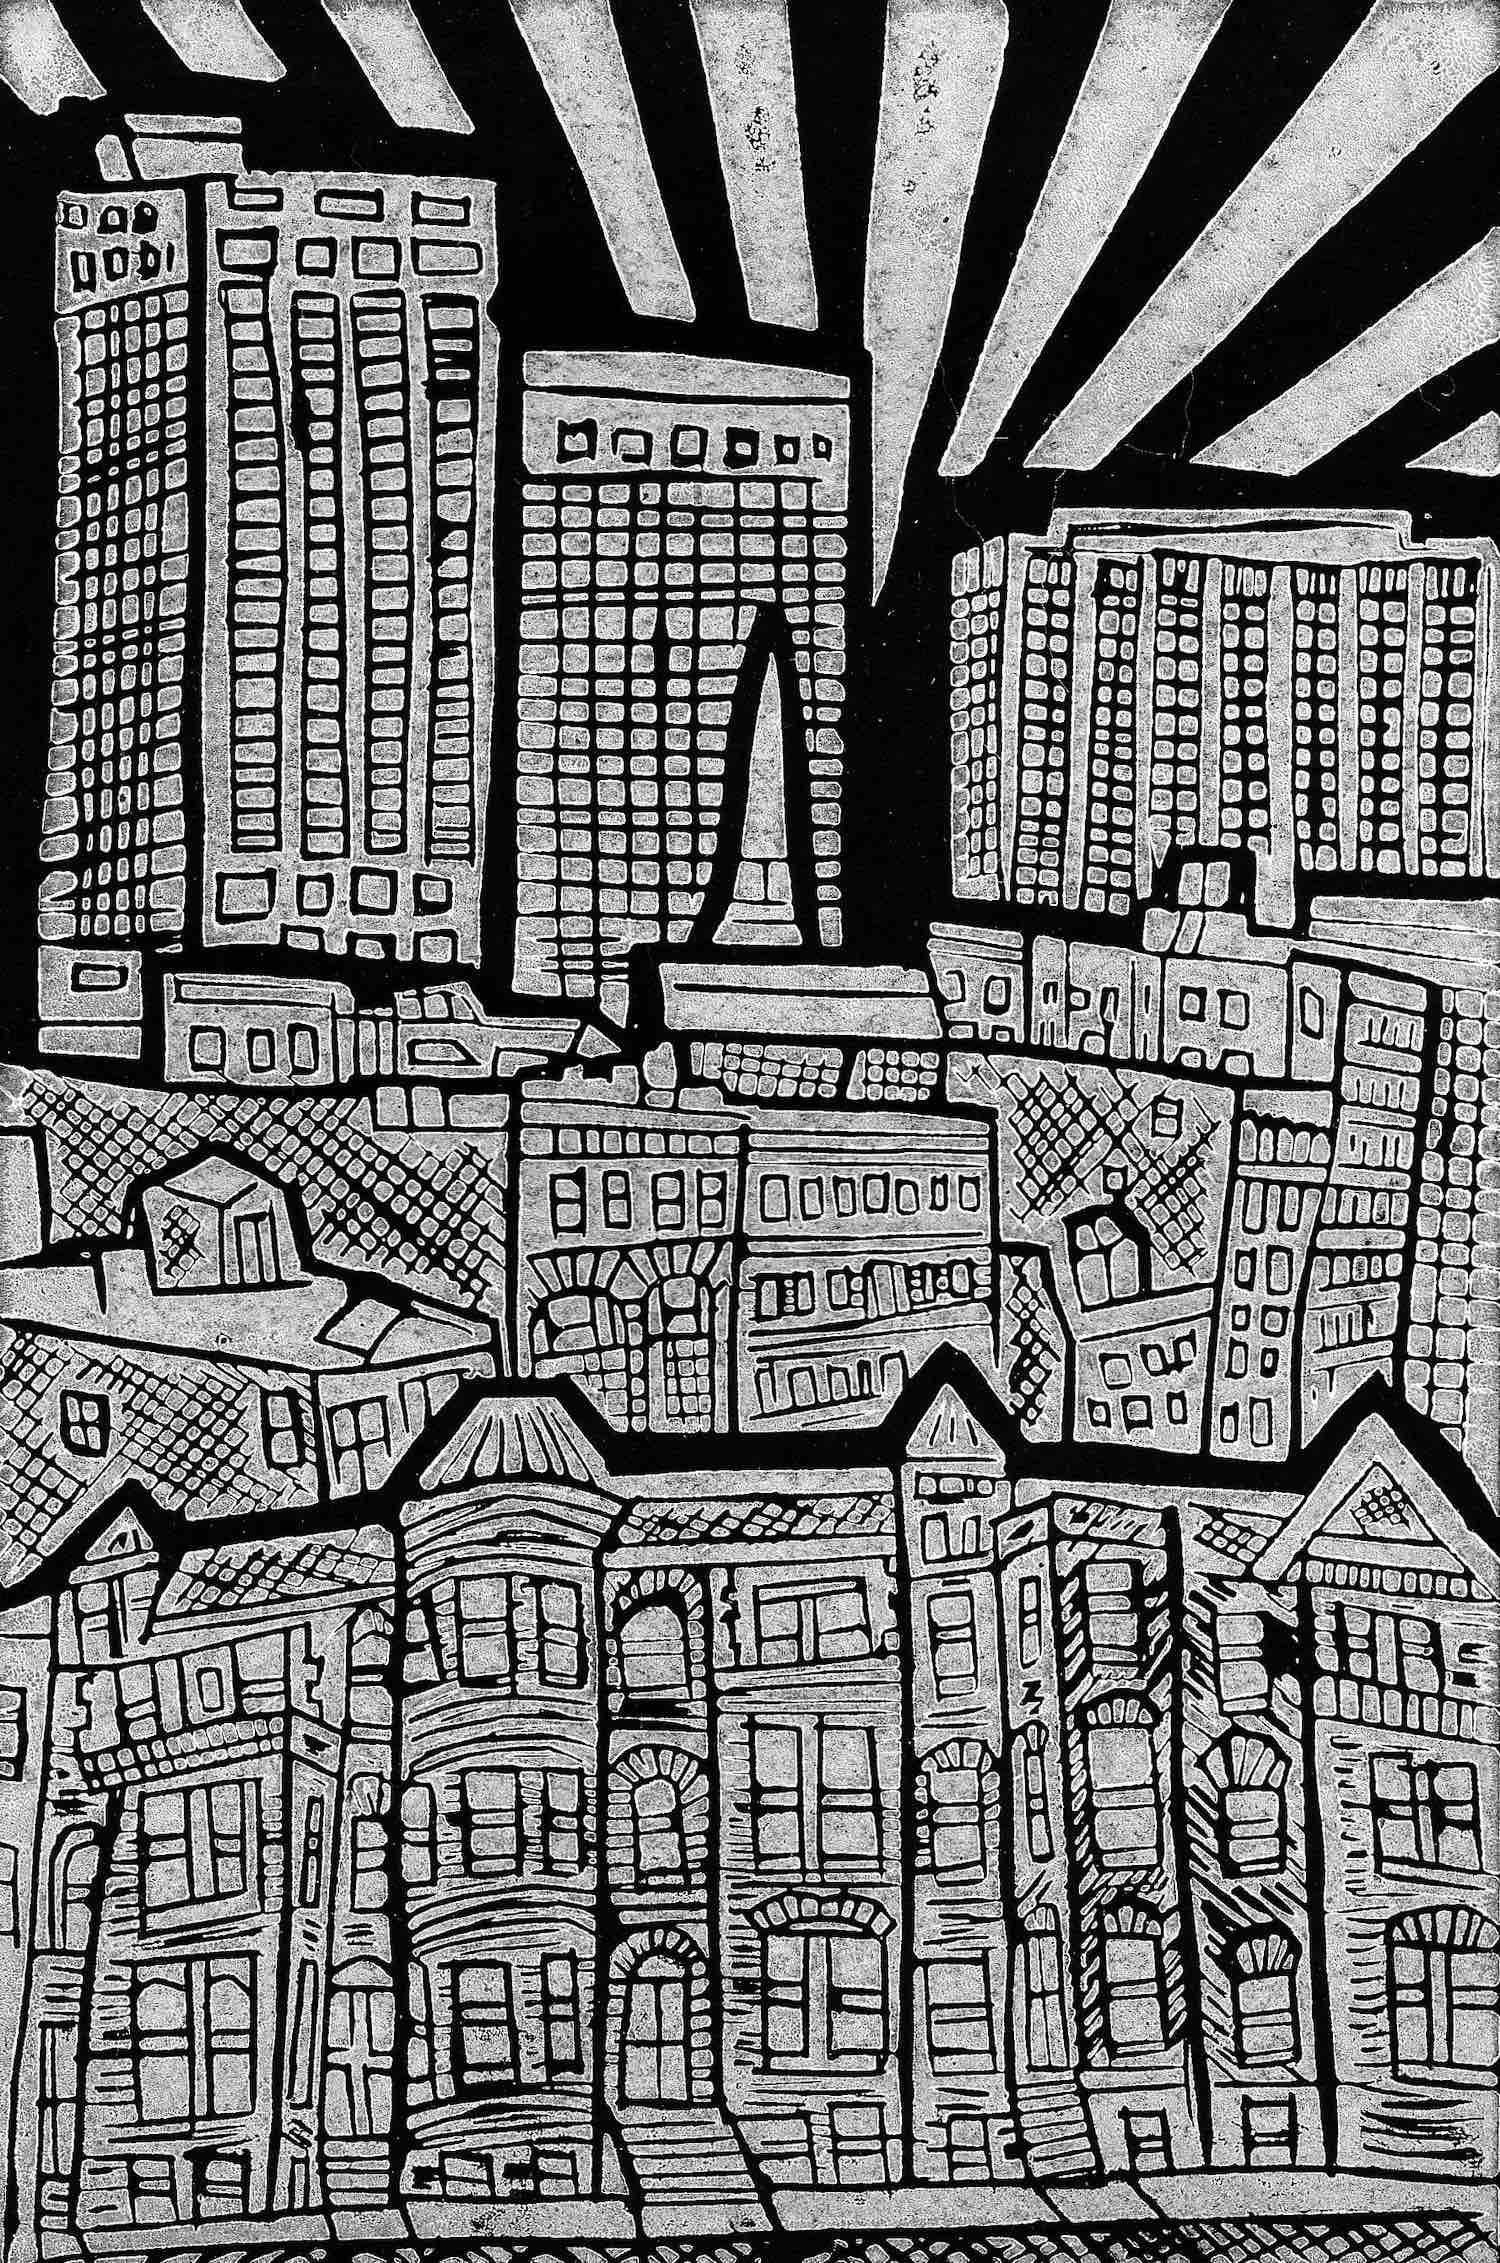 City scape block print by Charly Fasano.